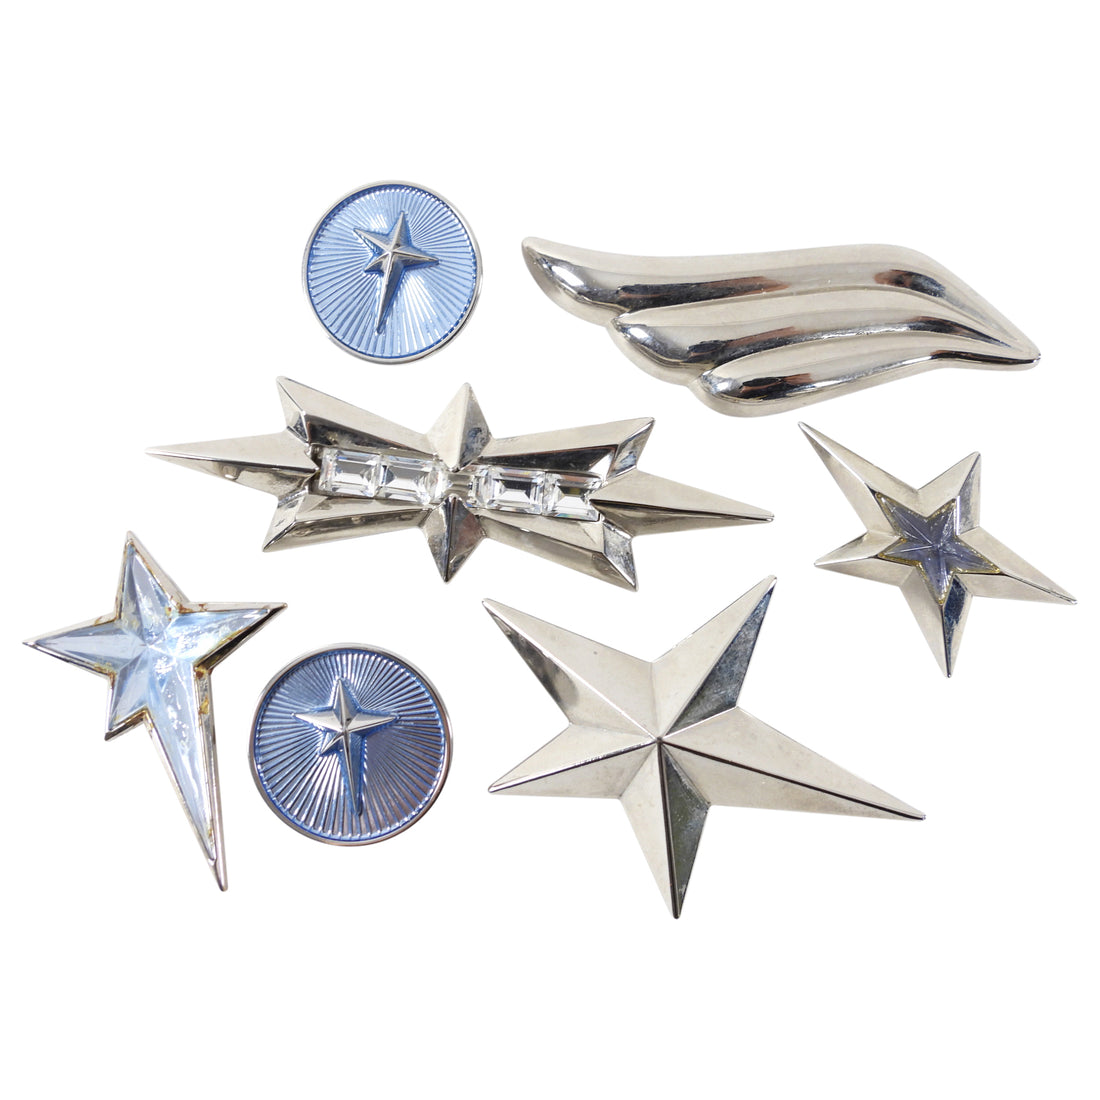 Thierry Mugler Vintage Costume Jewelry Pins Brooches